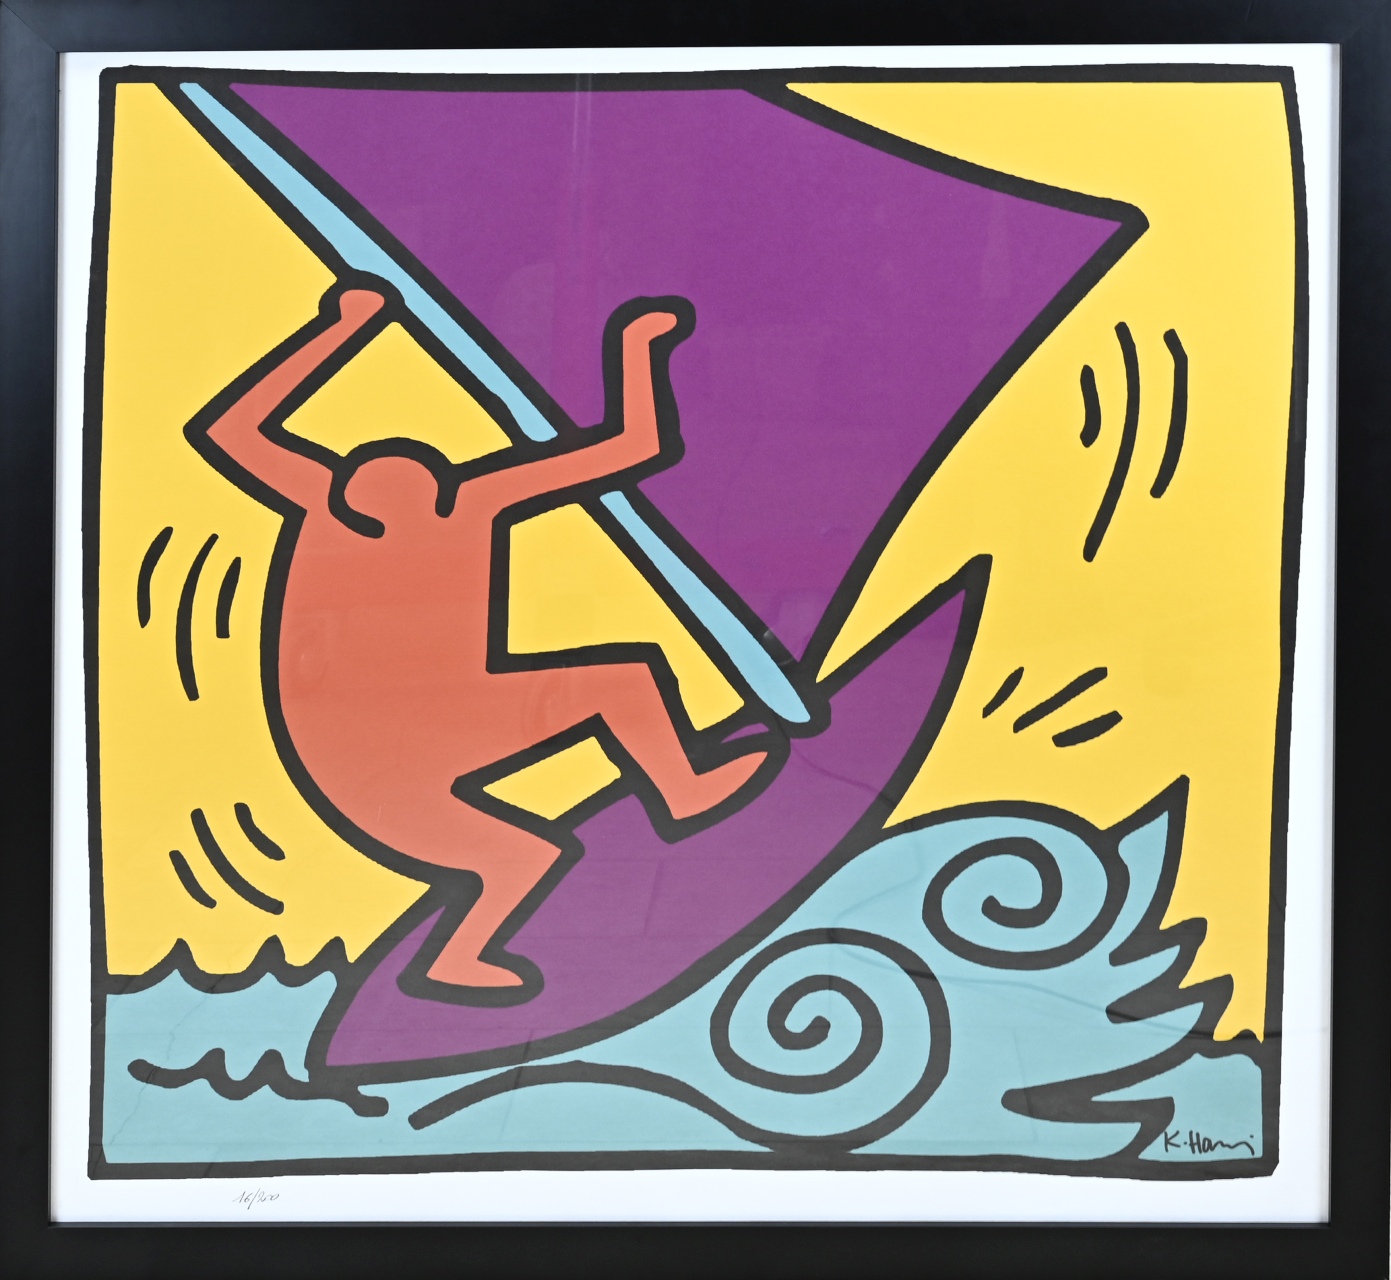 Print after Keith Haring, Man on surfboard